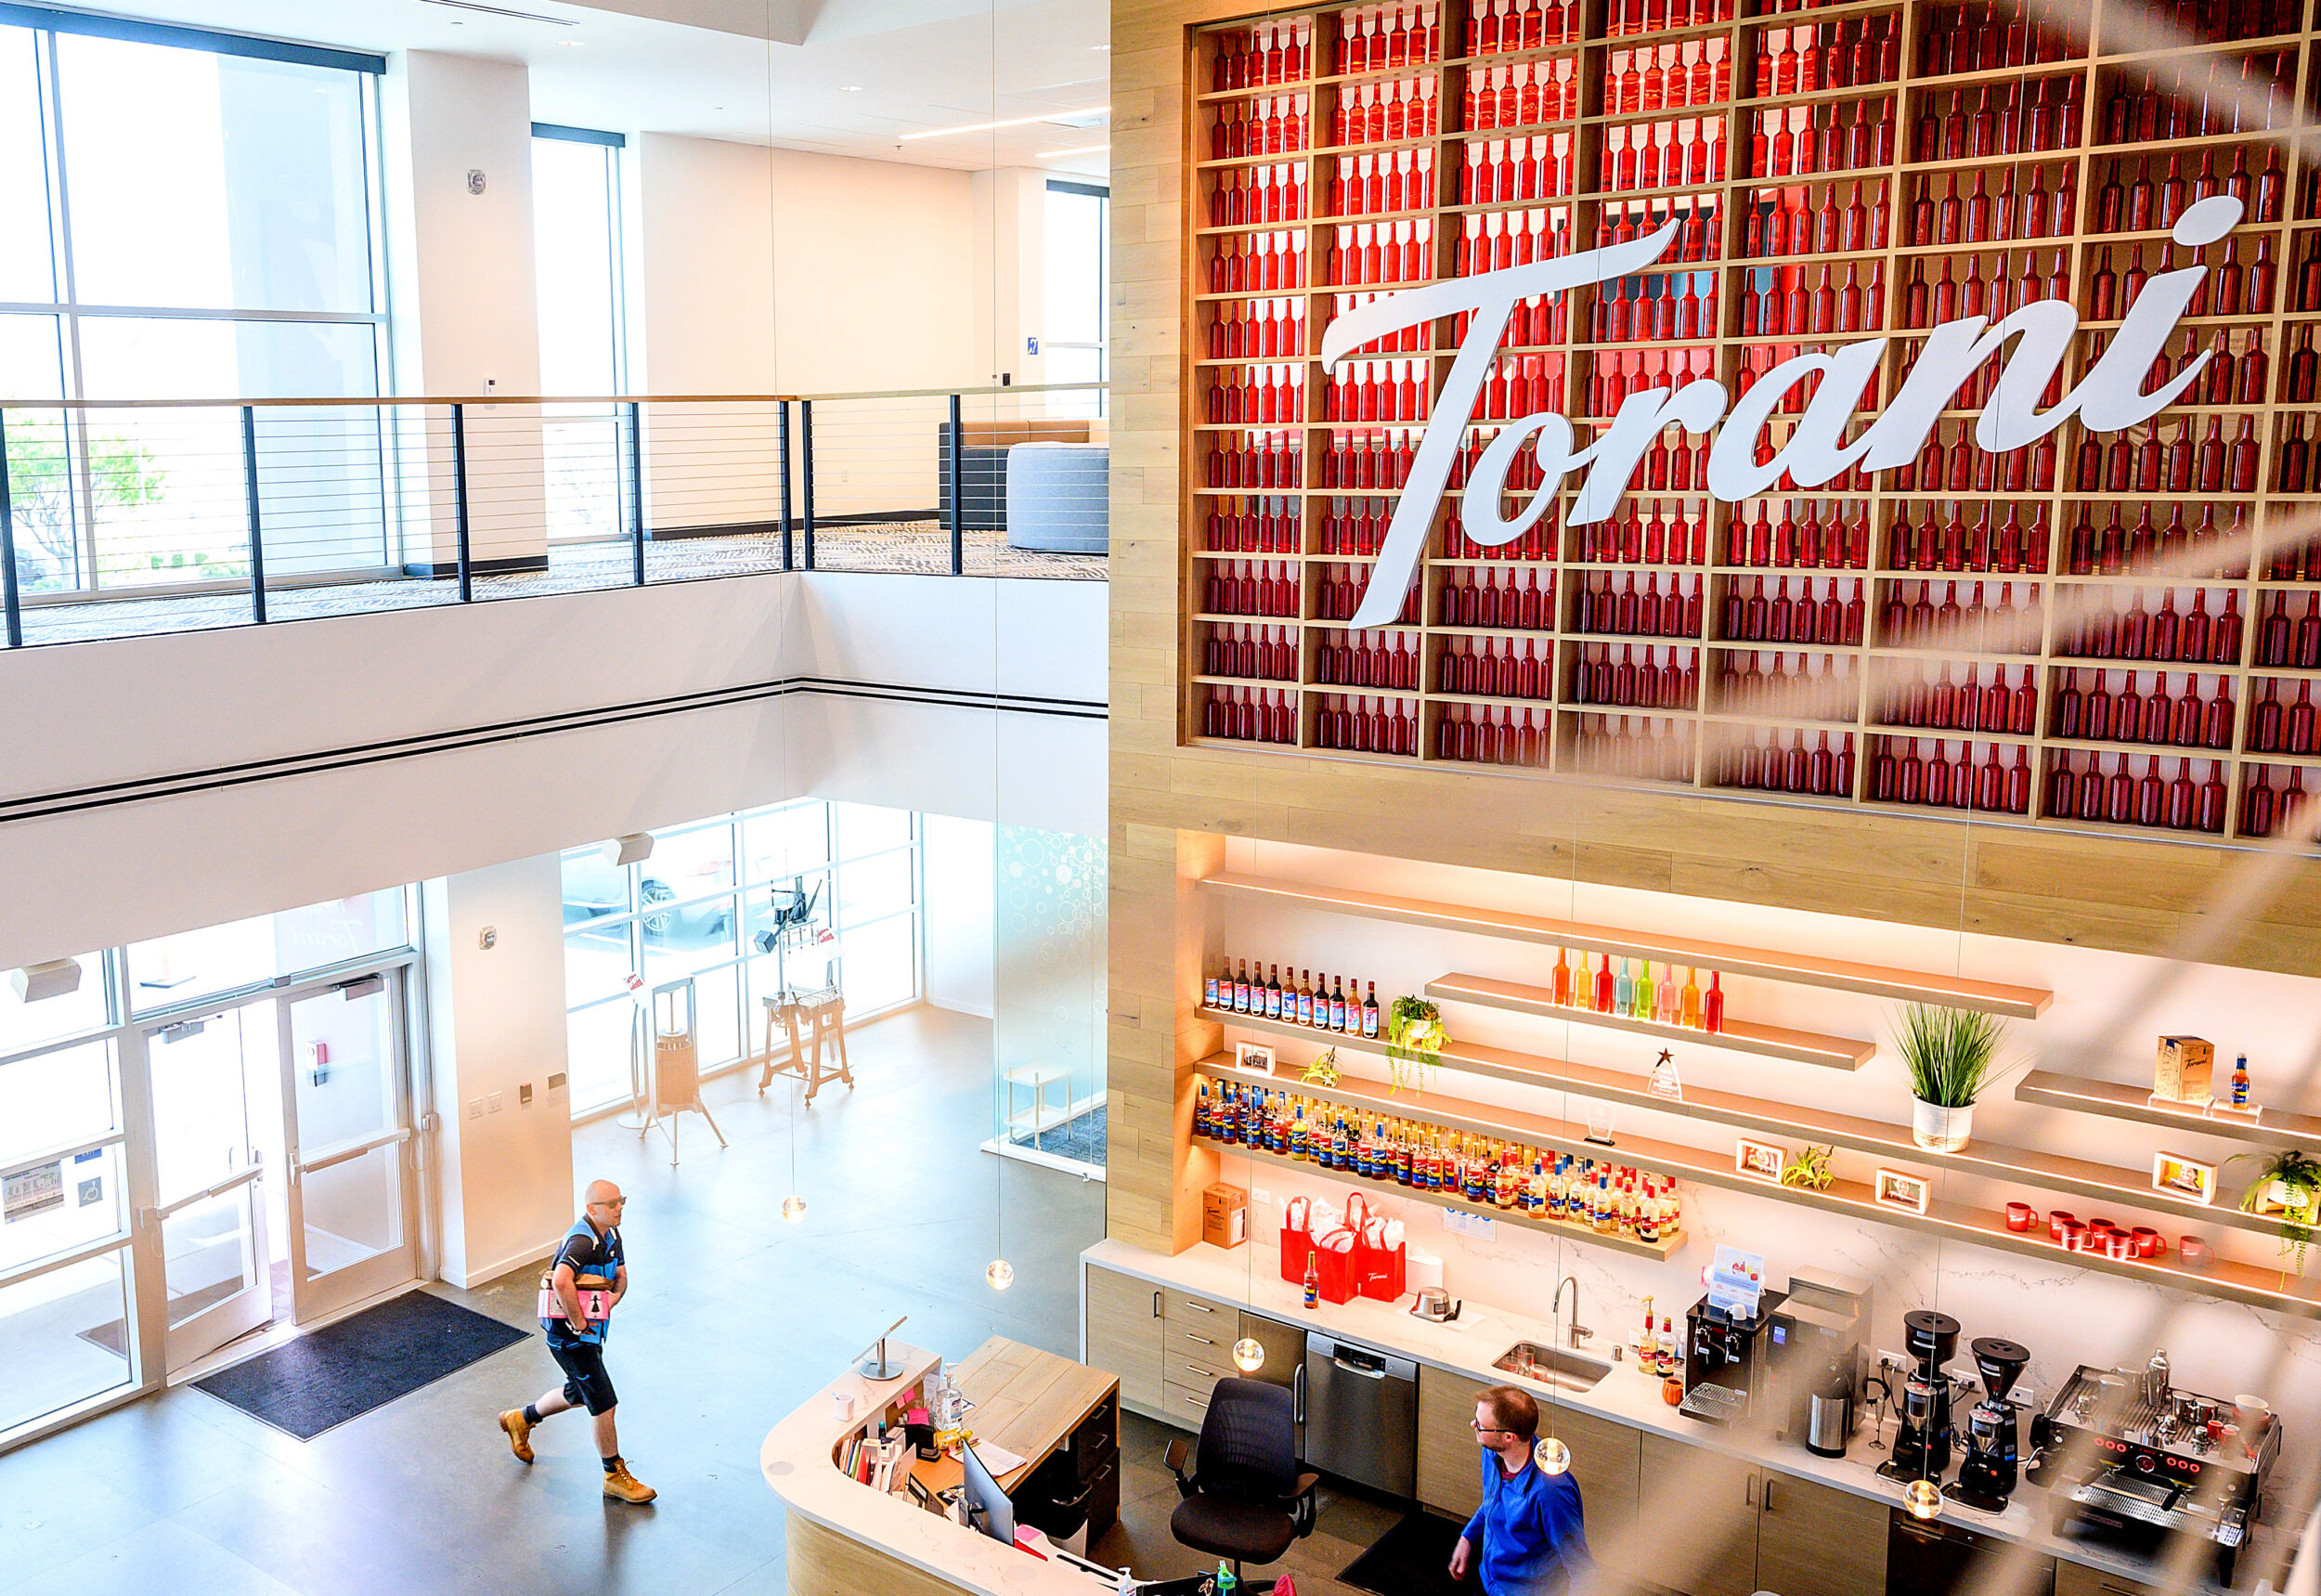 An image shows the lobby of a large office building with a sign that says "Torani."